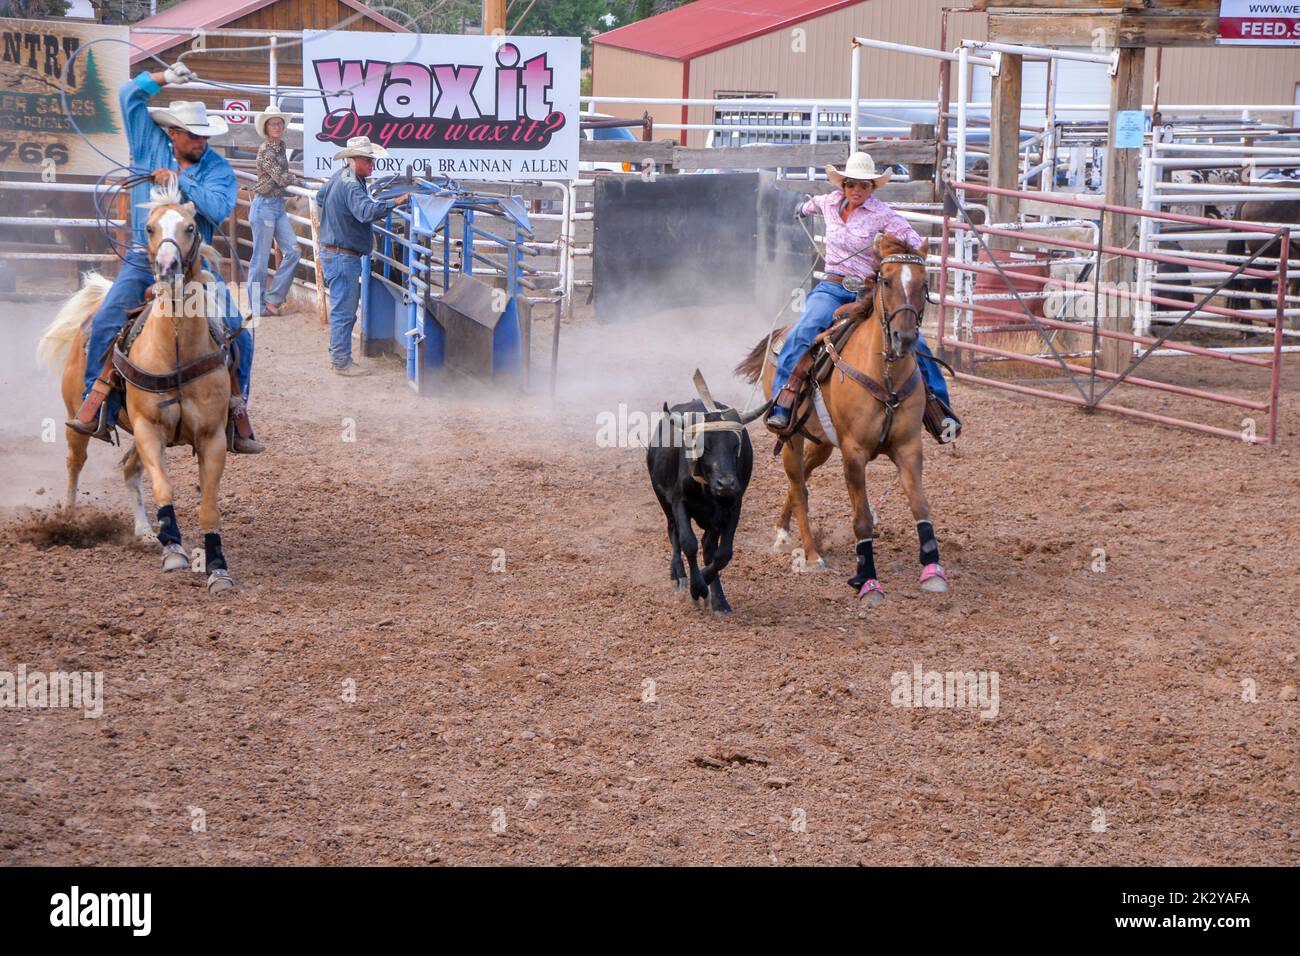 A mixed team of Cowboy and Cowgirl try to catch a young bull at a Rodeo in Fruita Colorado Stock Photo